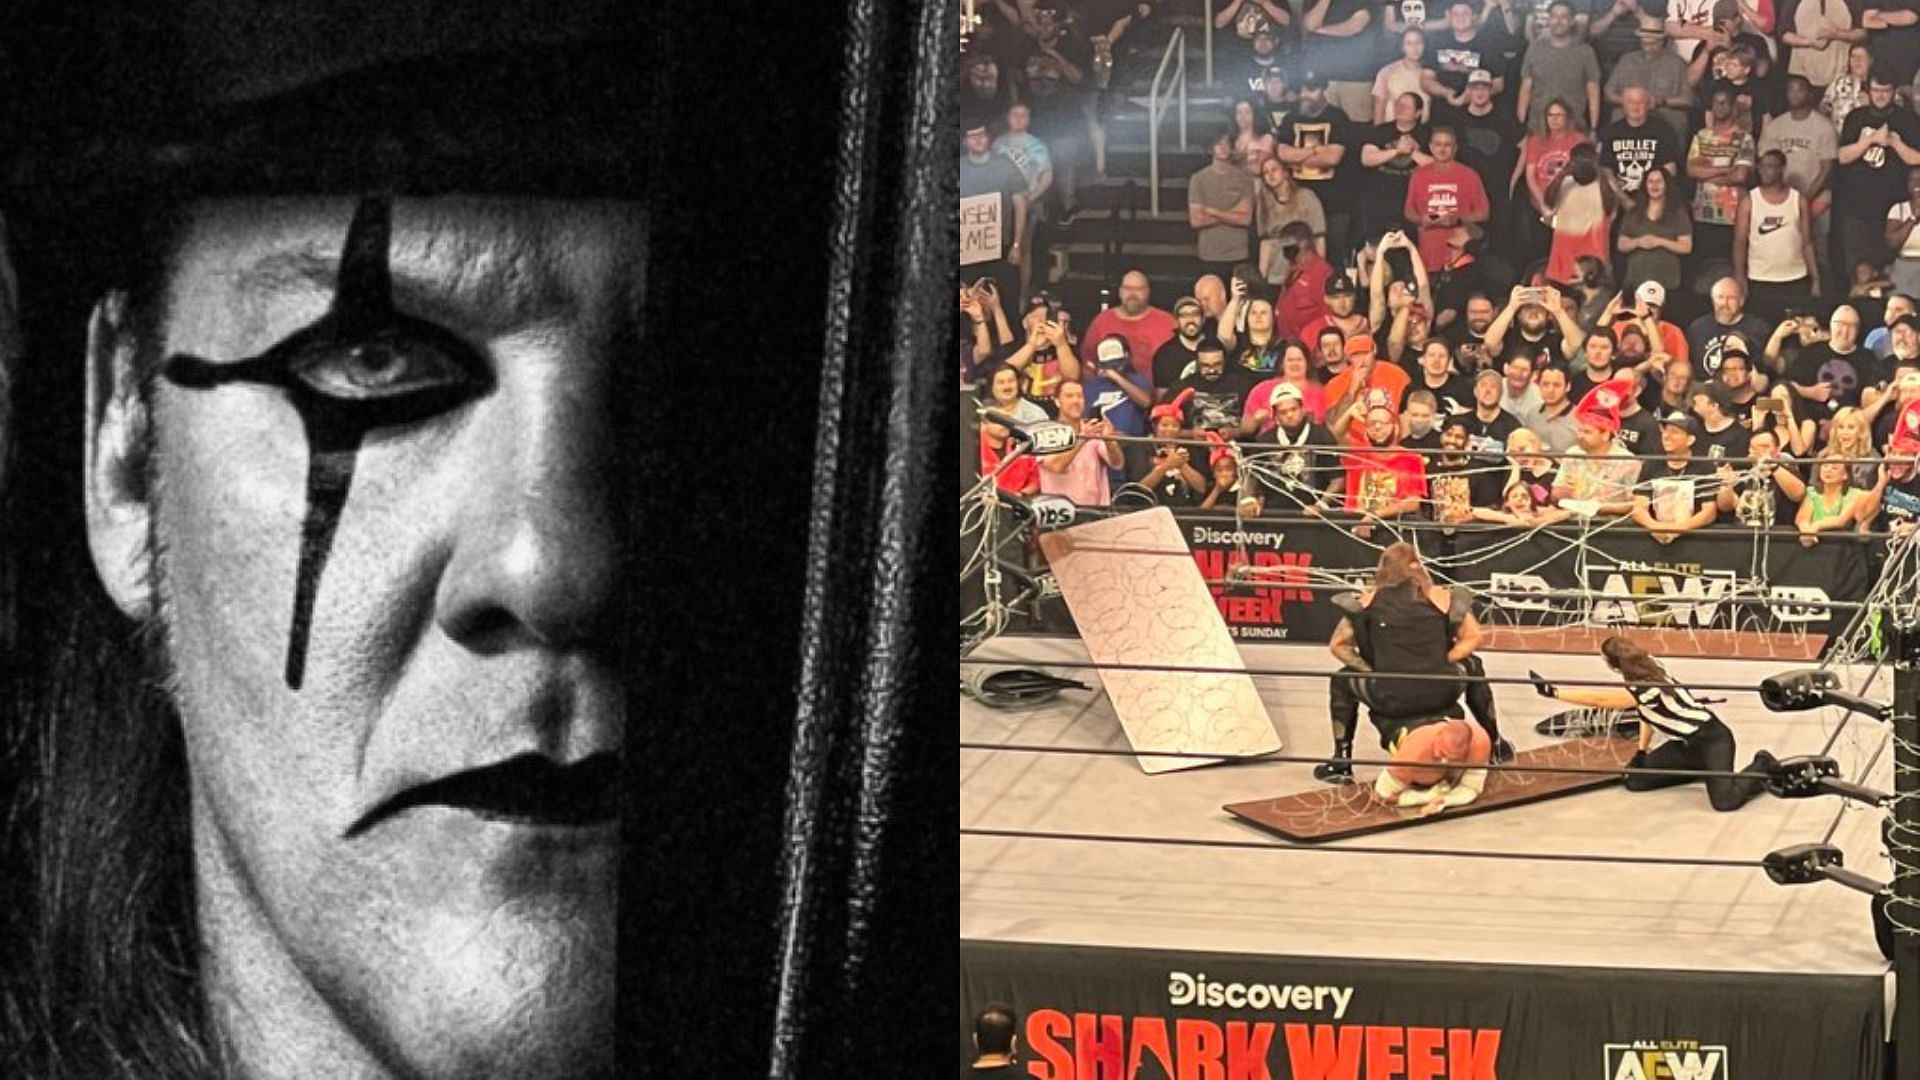 Chris Jericho had a barbaric match this week!